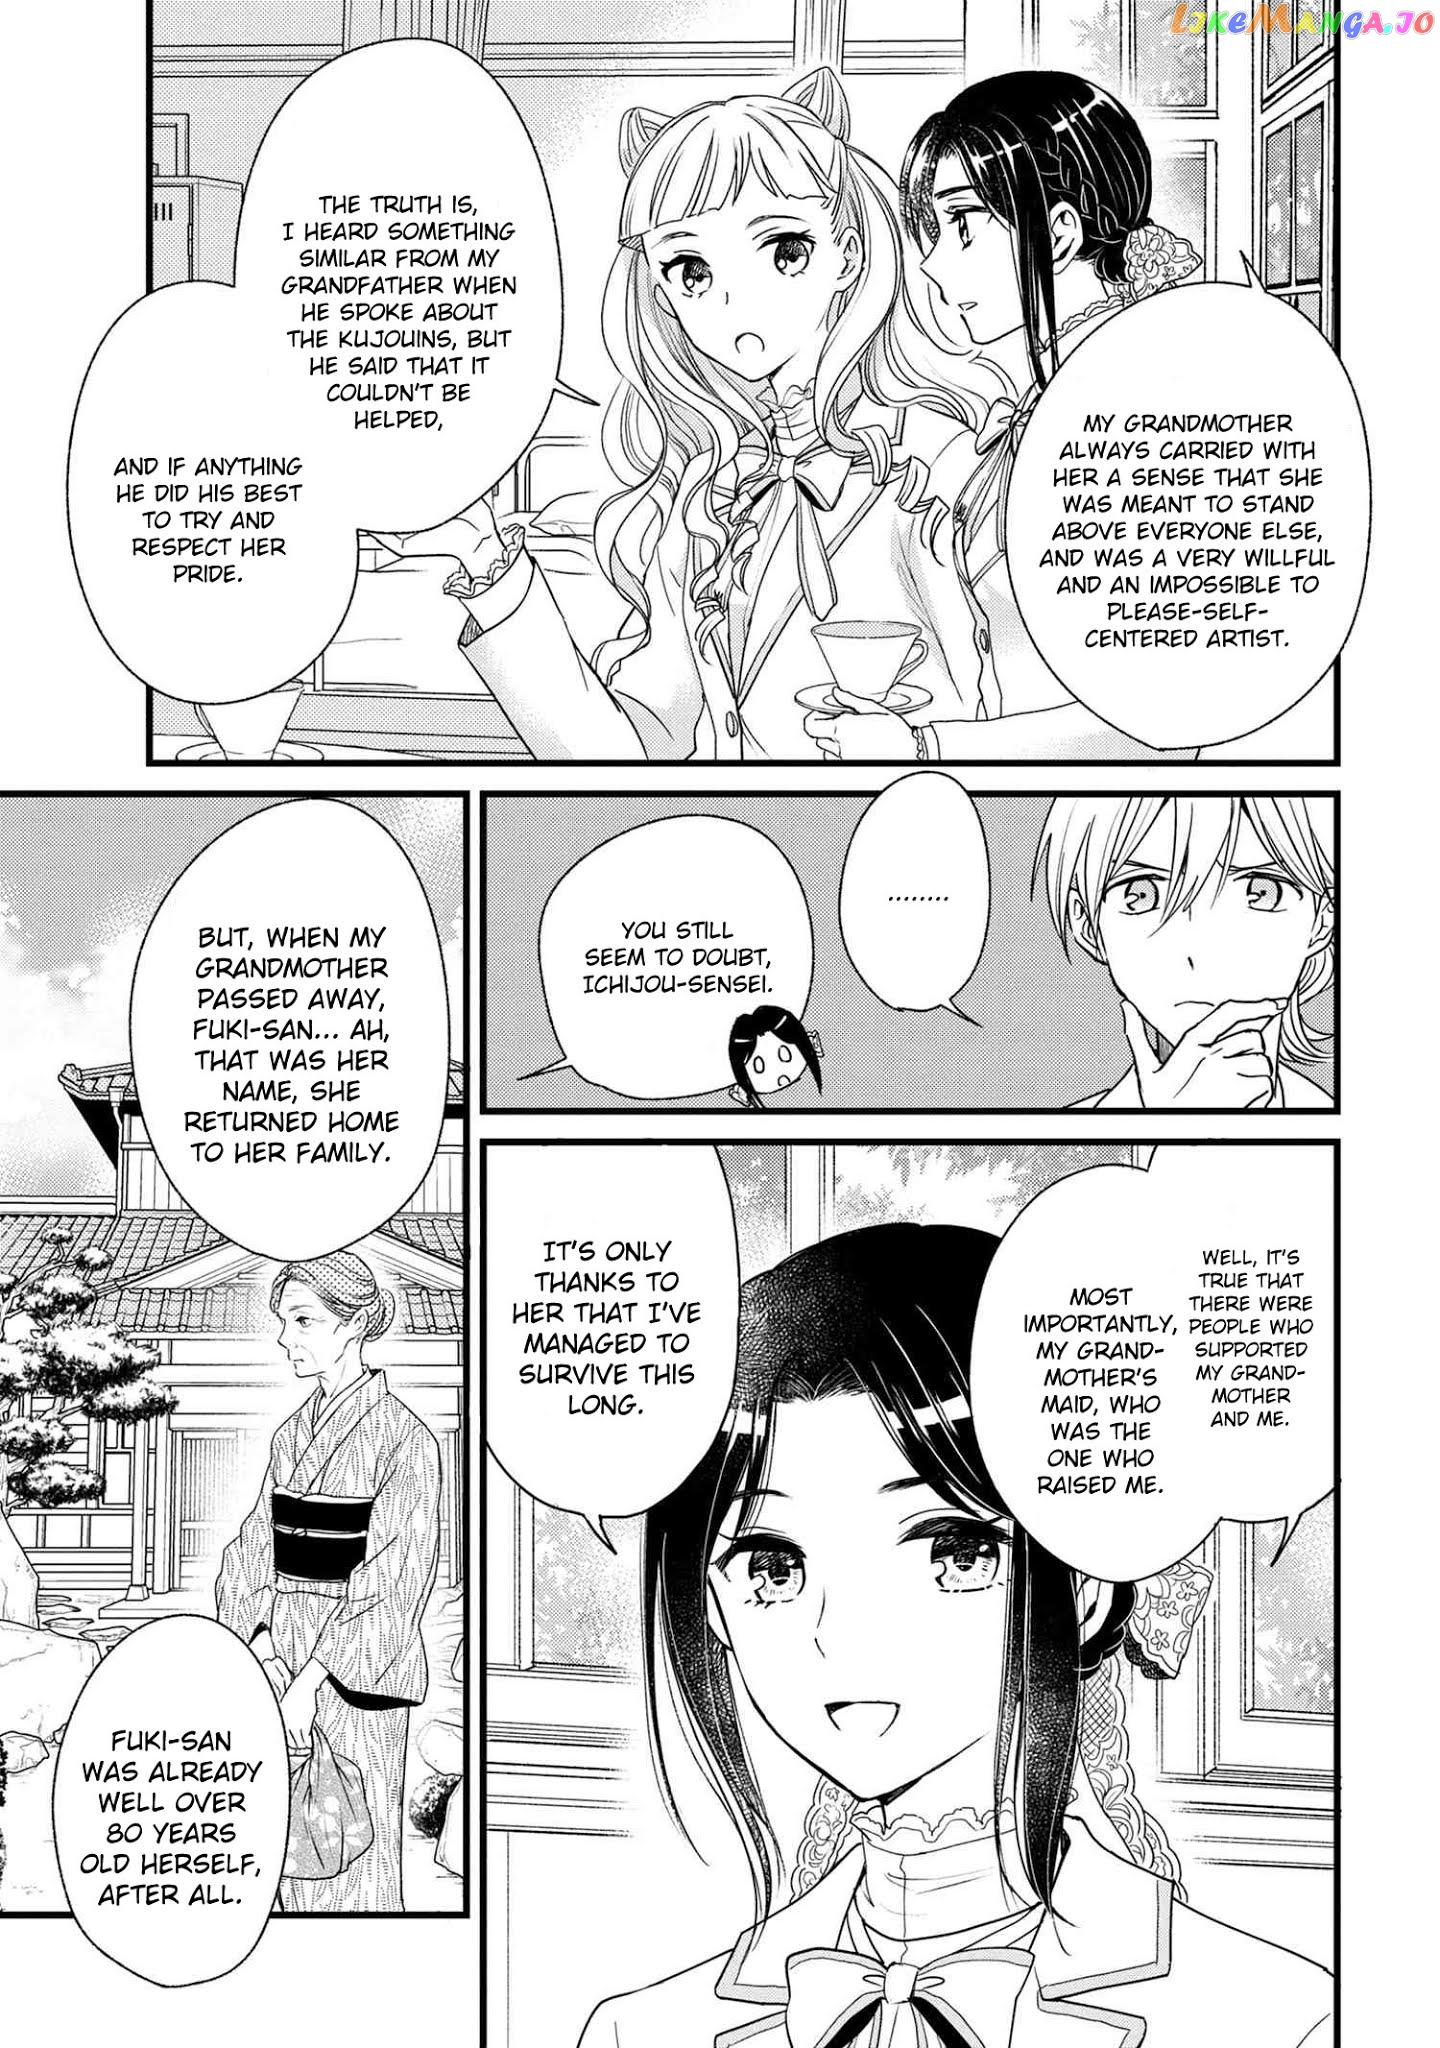 Reiko's Style: Despite Being Mistaken For A Rich Villainess, She's Actually Just Penniless chapter 3 - page 20